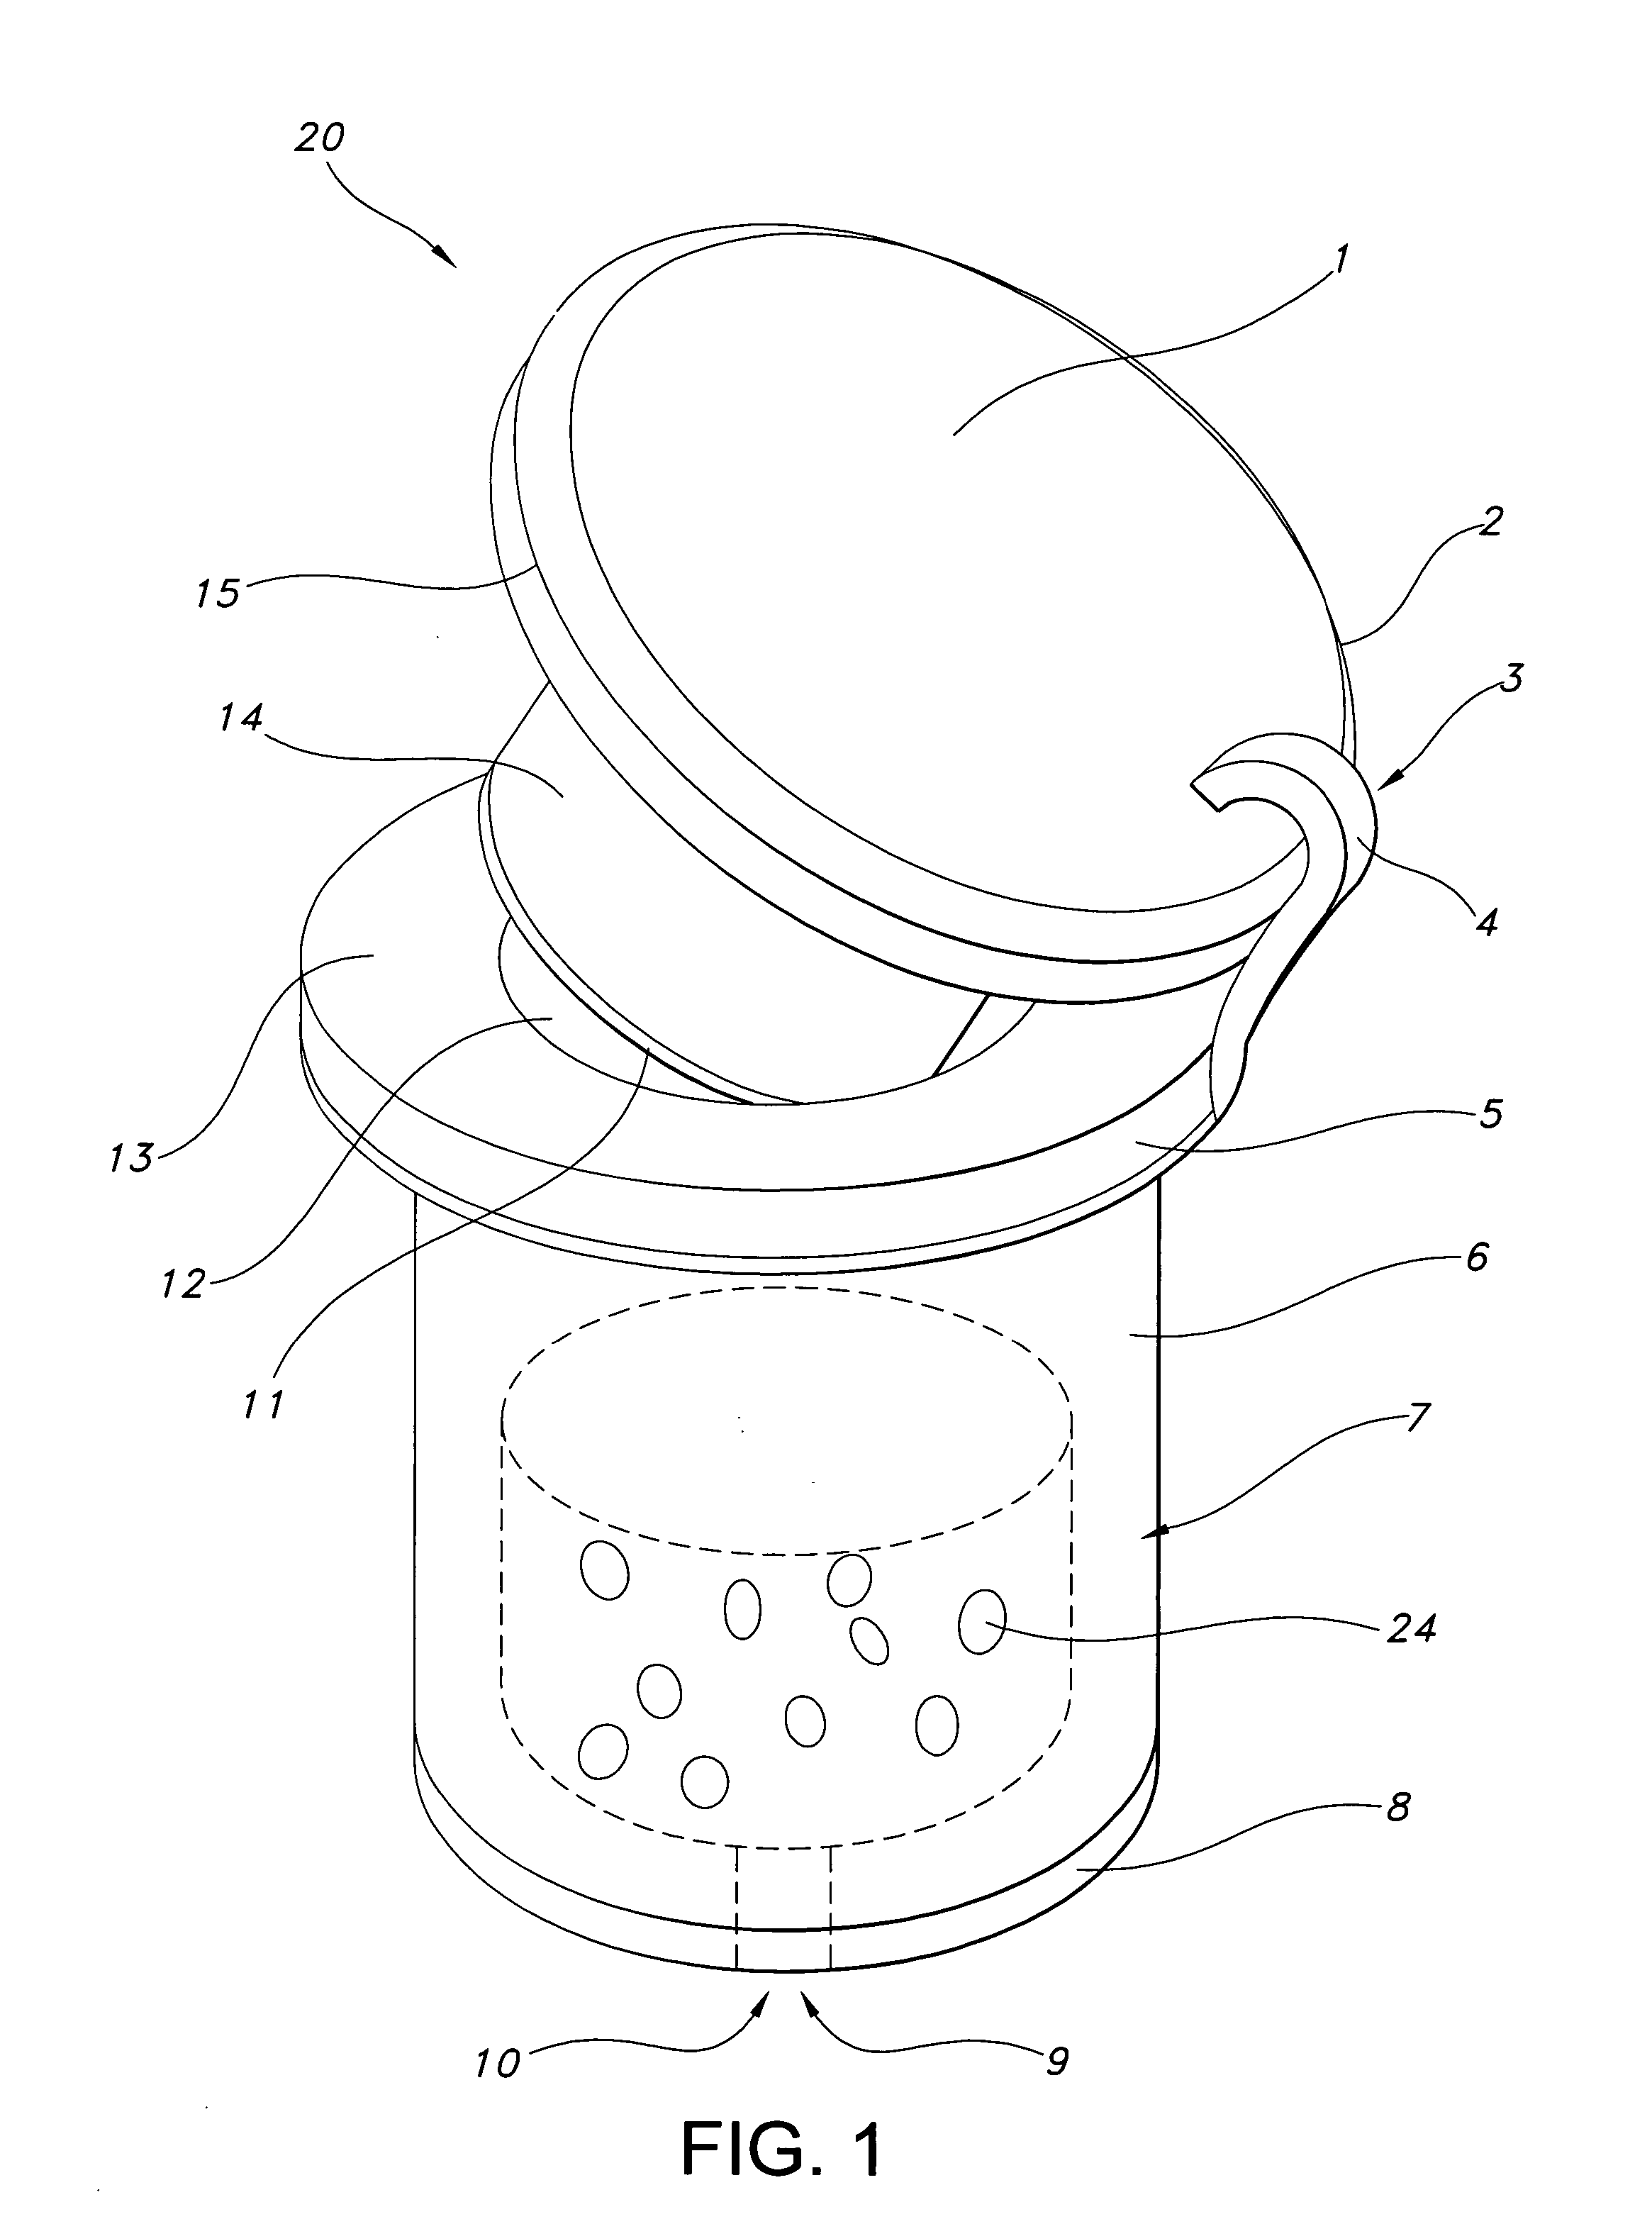 Capsule for encasing tablets for surgical insertion into the human body